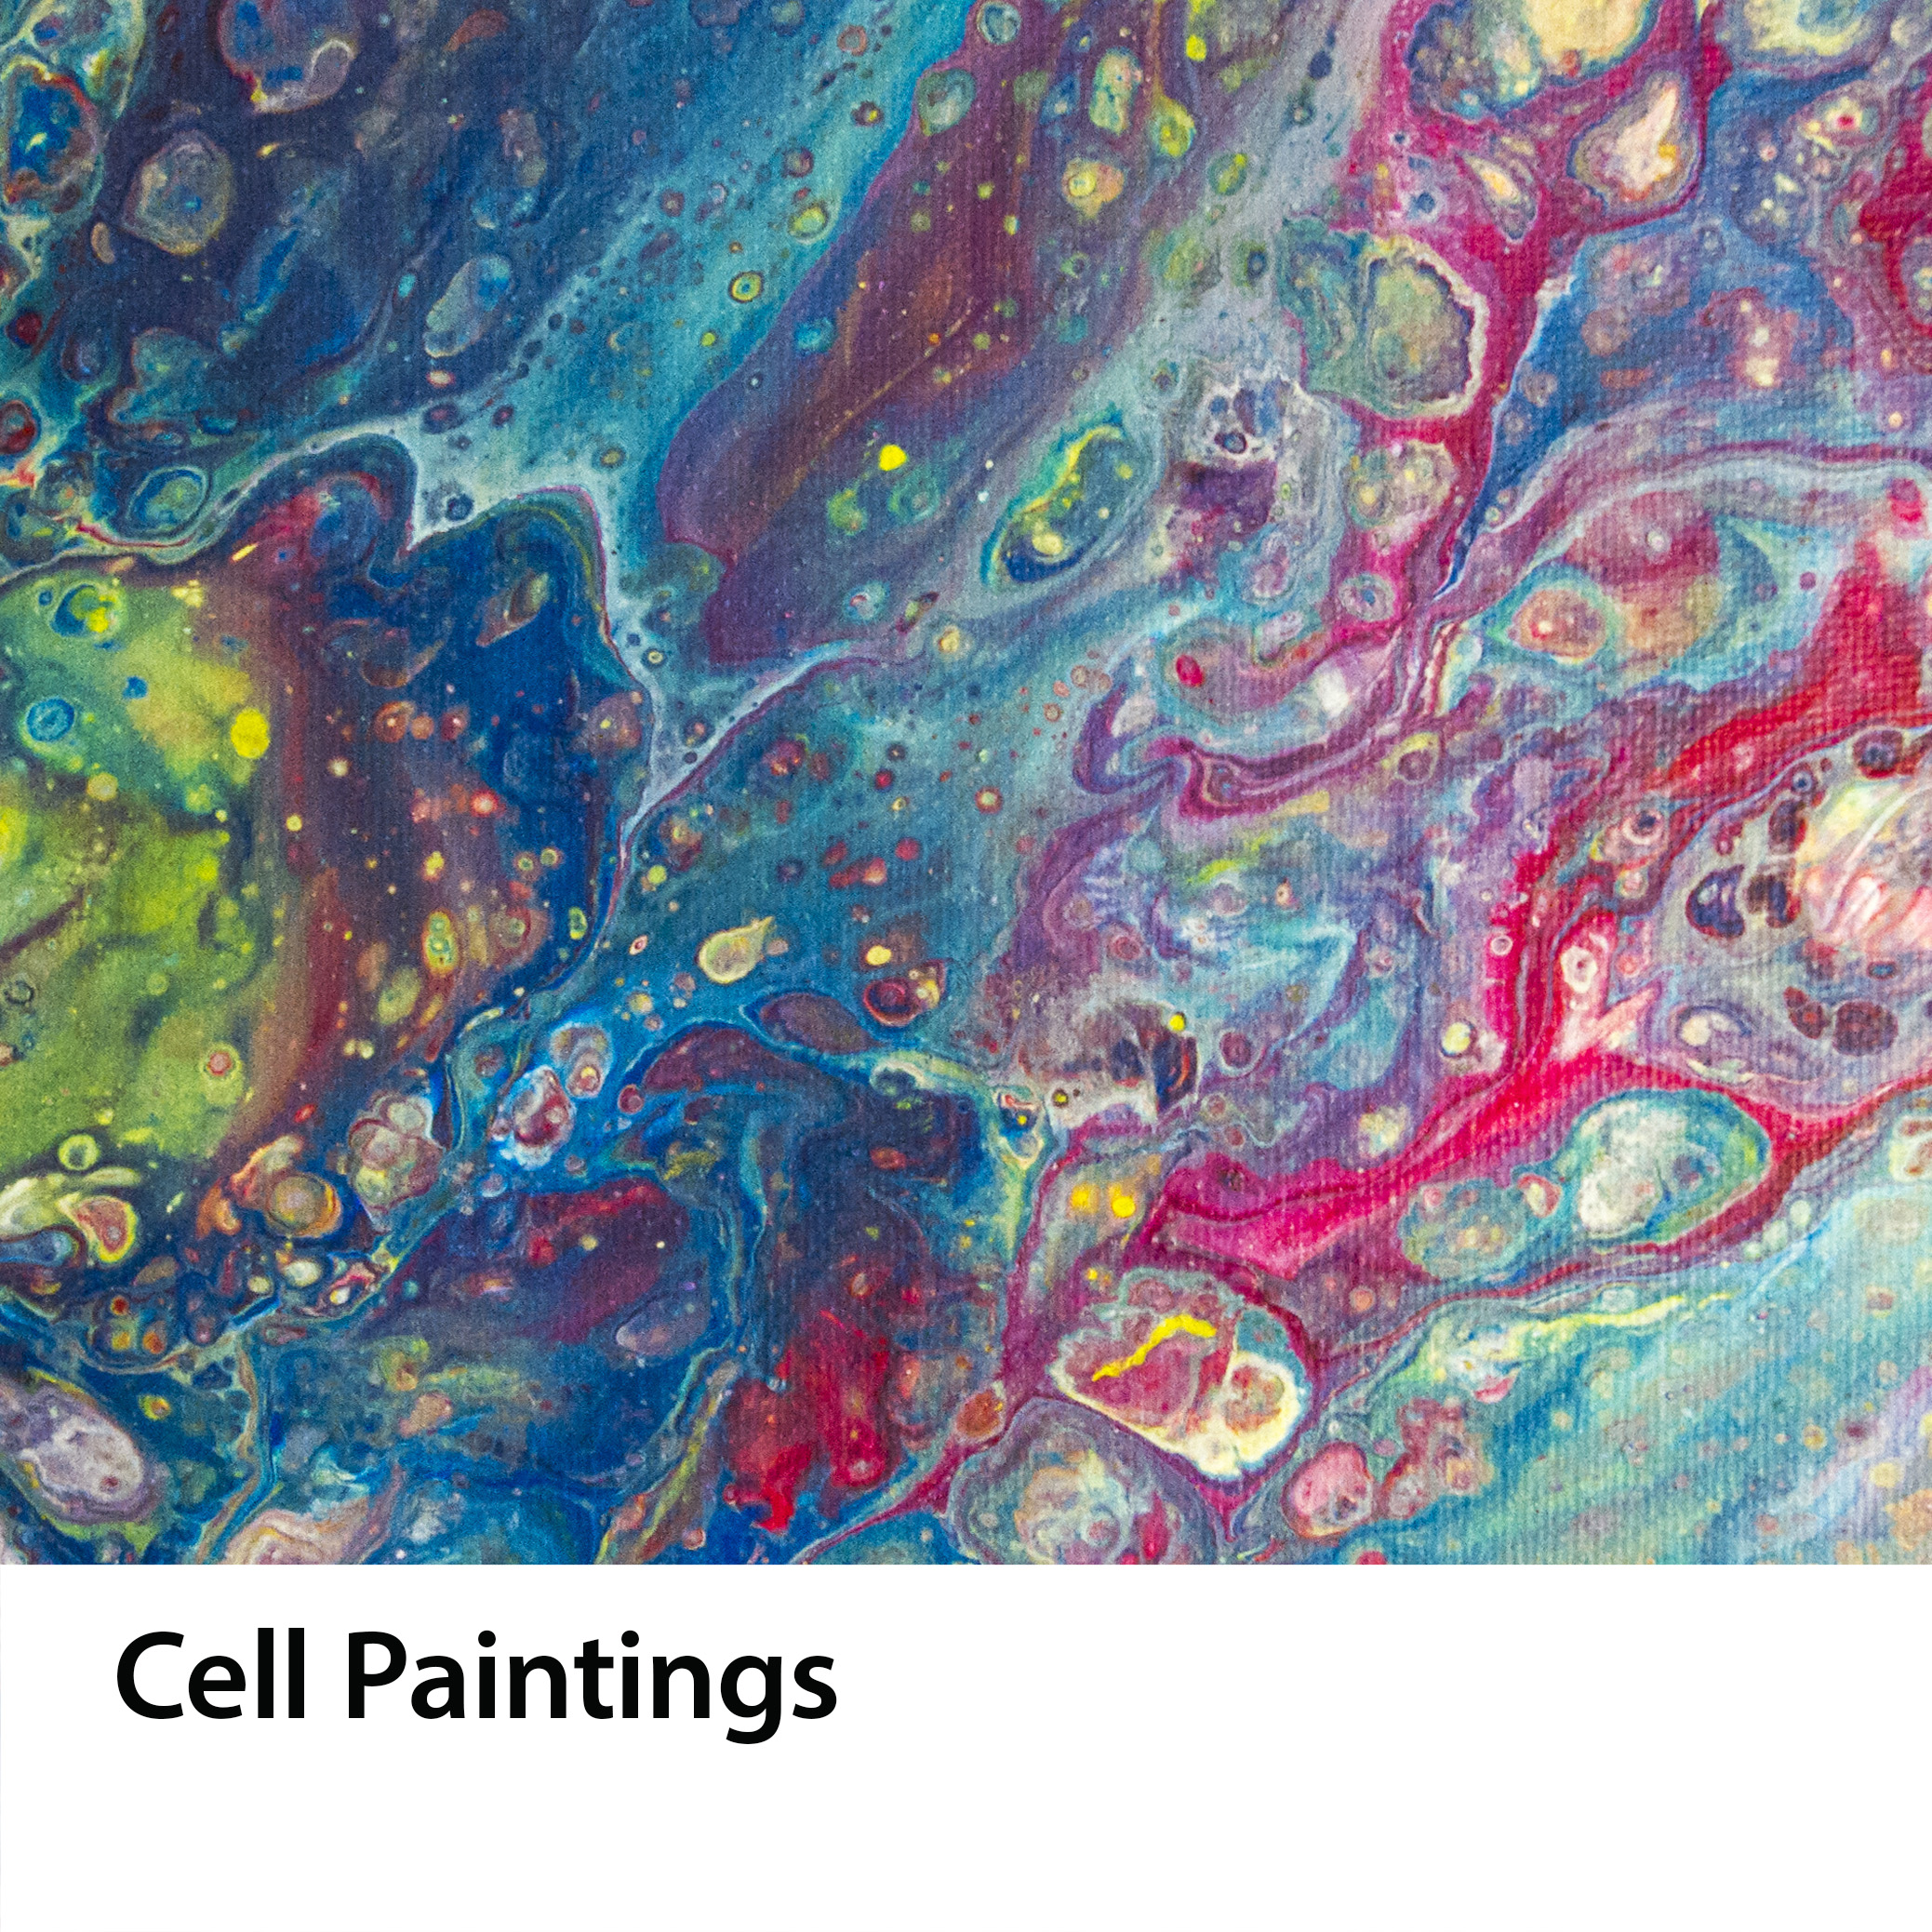 Cell Paintings